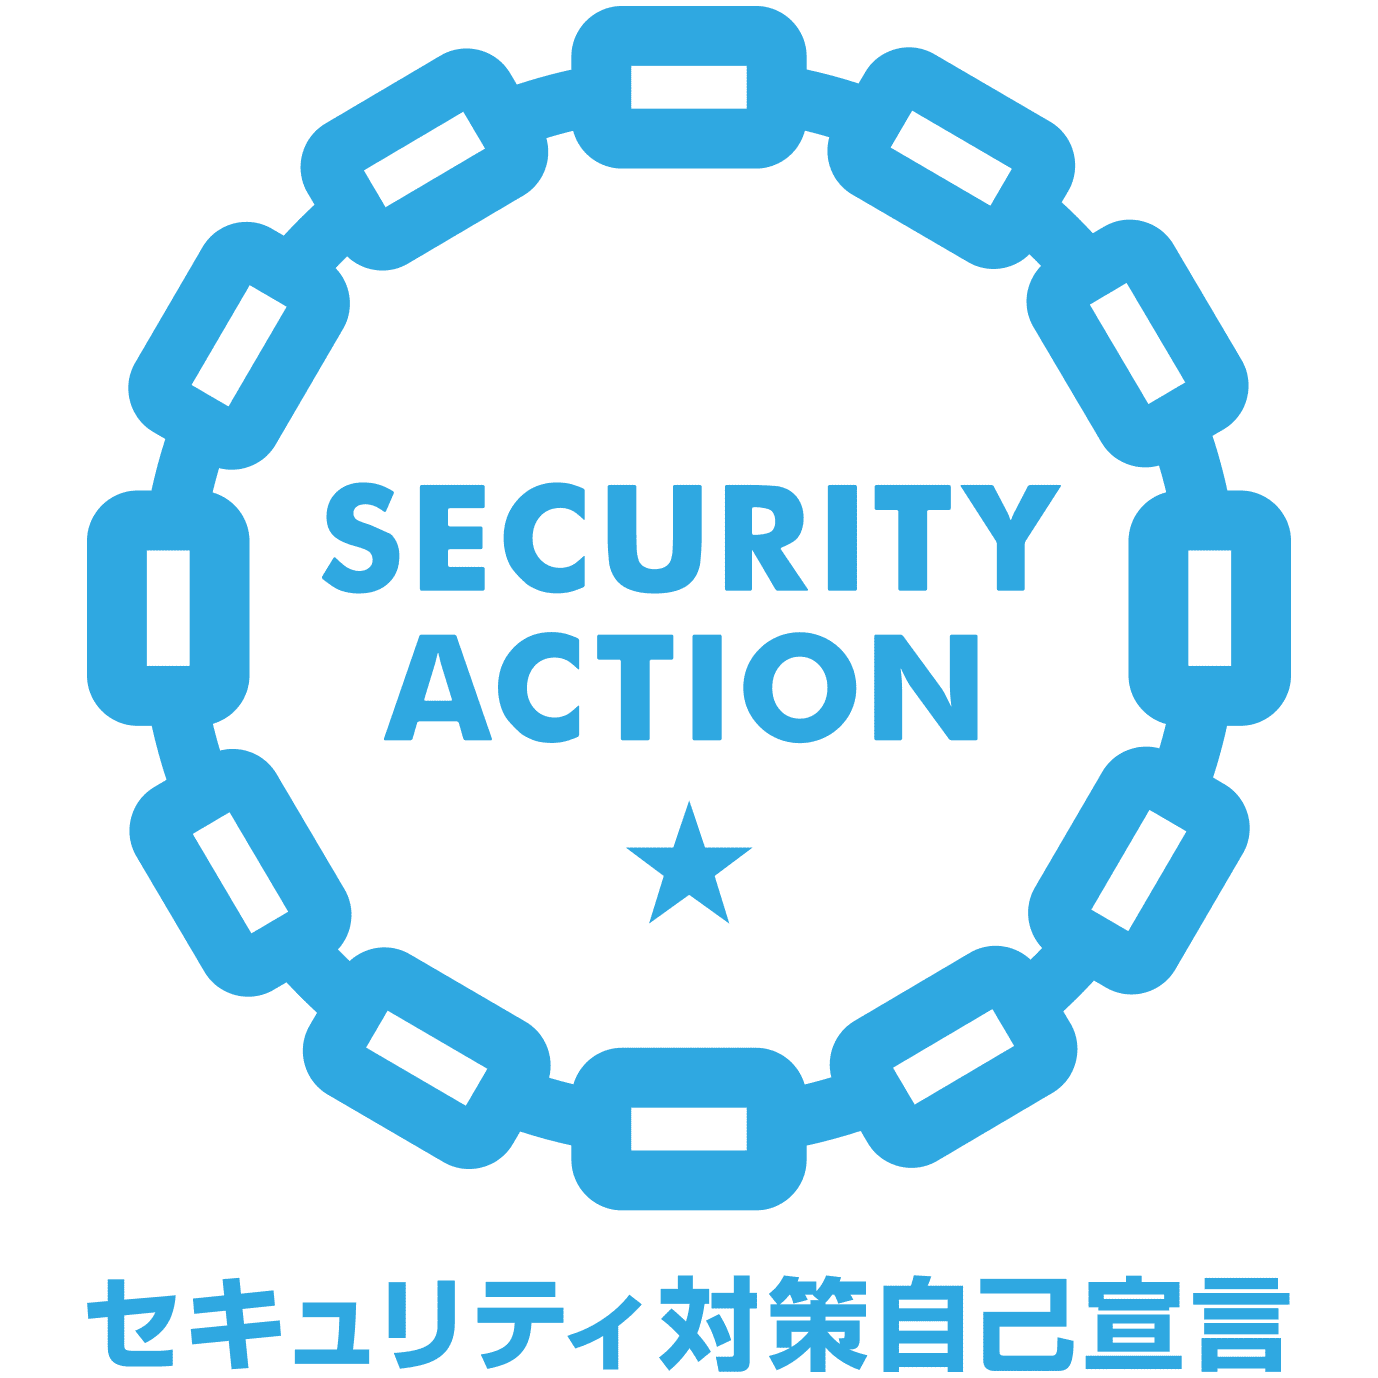 SECURITY ACTION（一つ星）